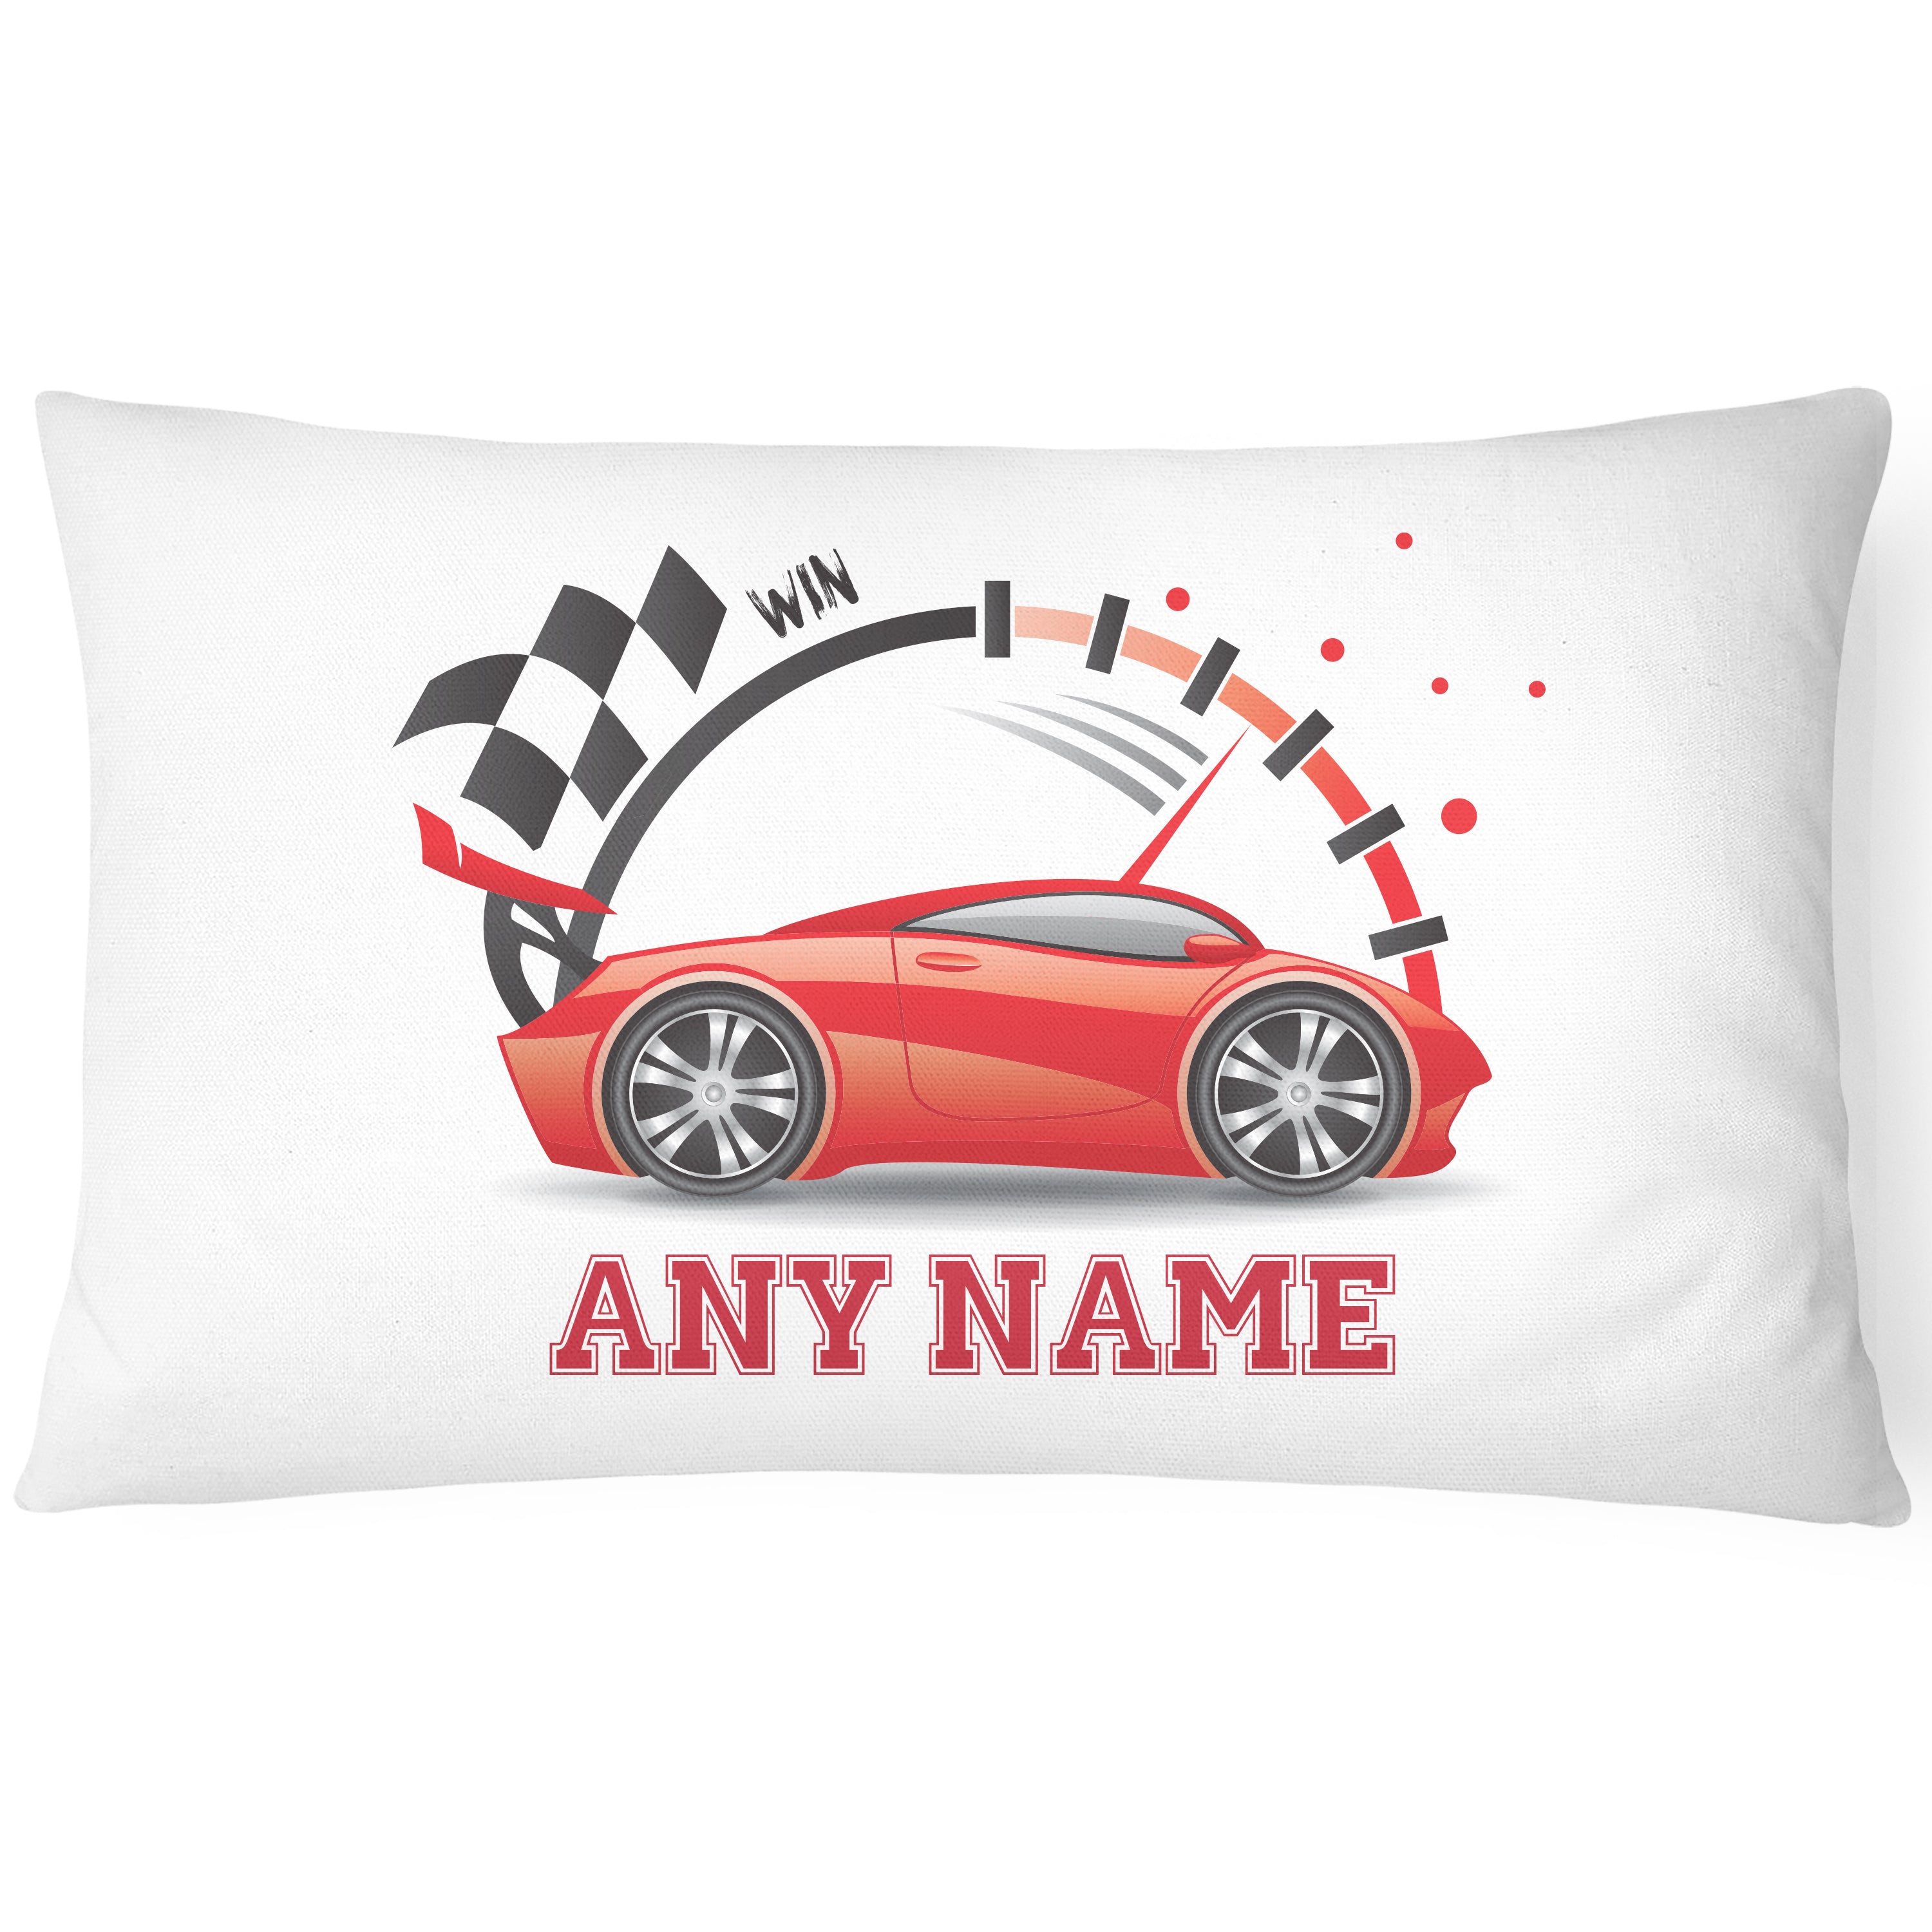 Race Car Pillowcase for Kids - Personalise With Any Name - Perfect Children's Gift - Racer